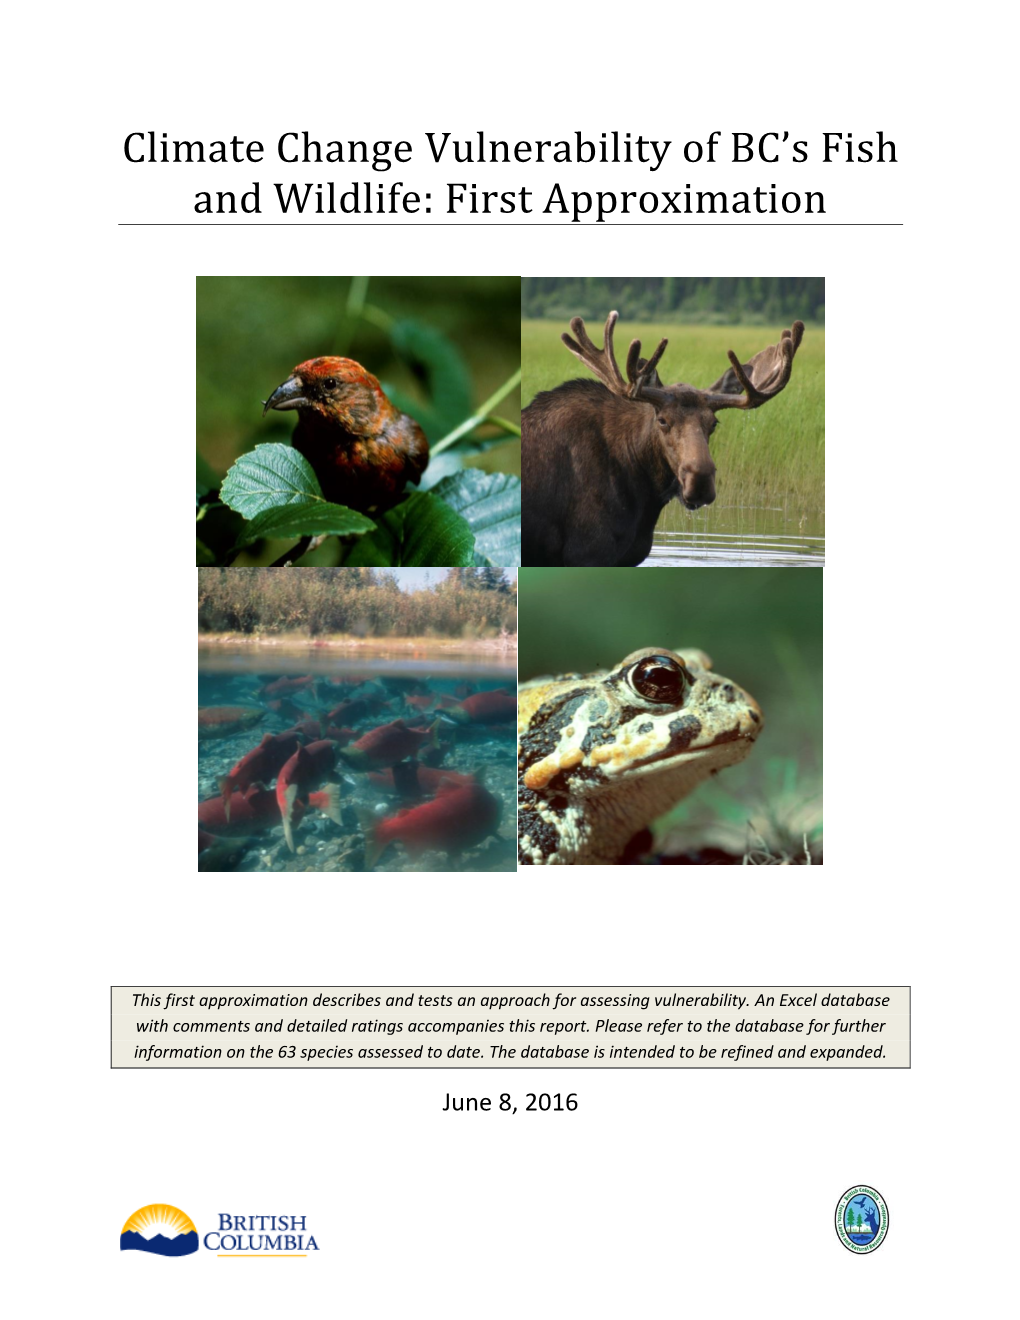 Climate Change Vulnerability of BC's Fish and Wildlife: First Approximation